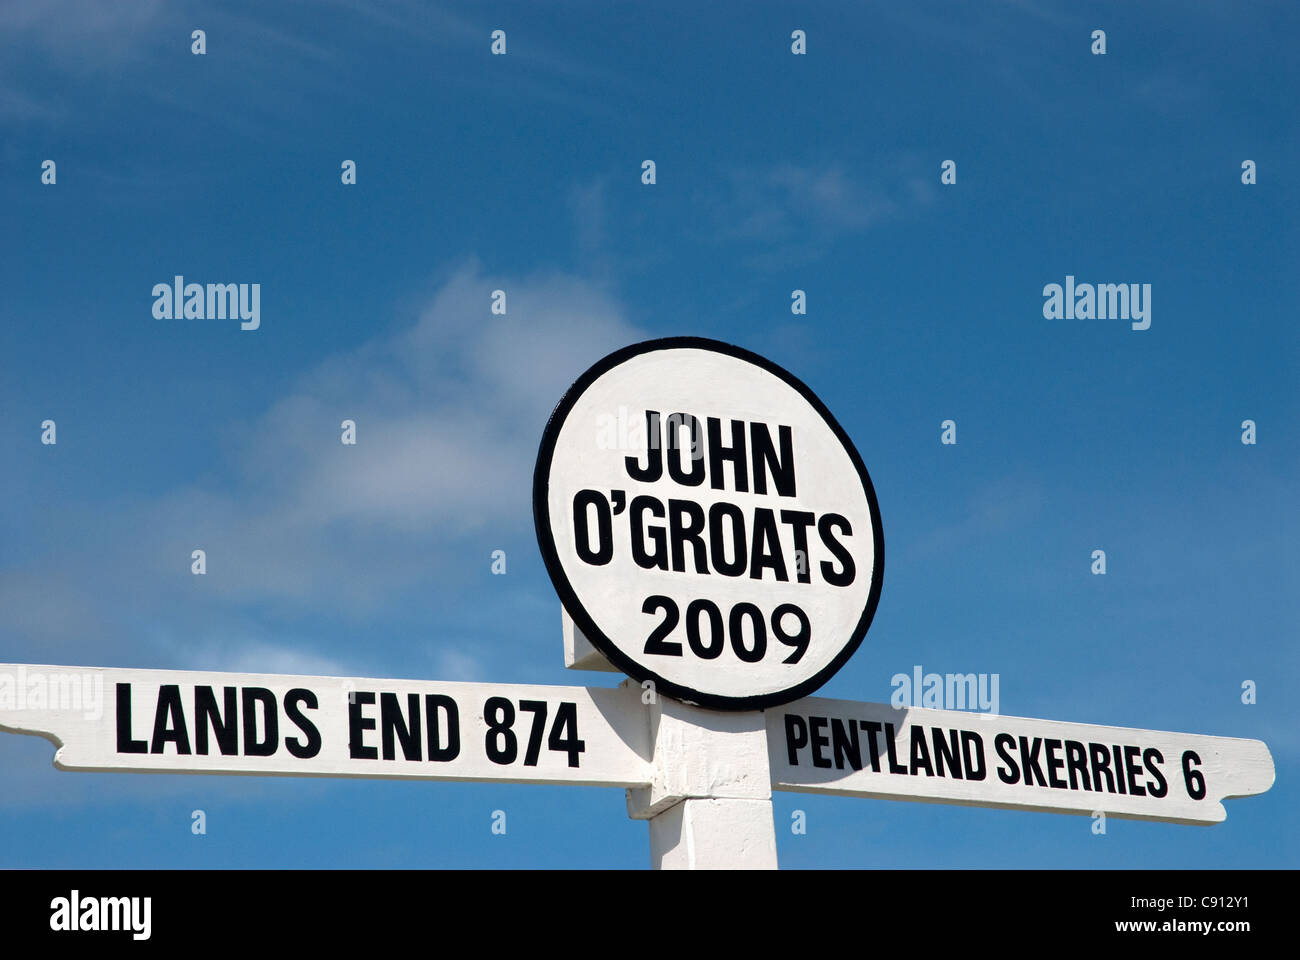 Sign at John O'Groats Scotland pointing the way to Lands End. John O'Groats is the most northern point on the UK mainland and Stock Photo